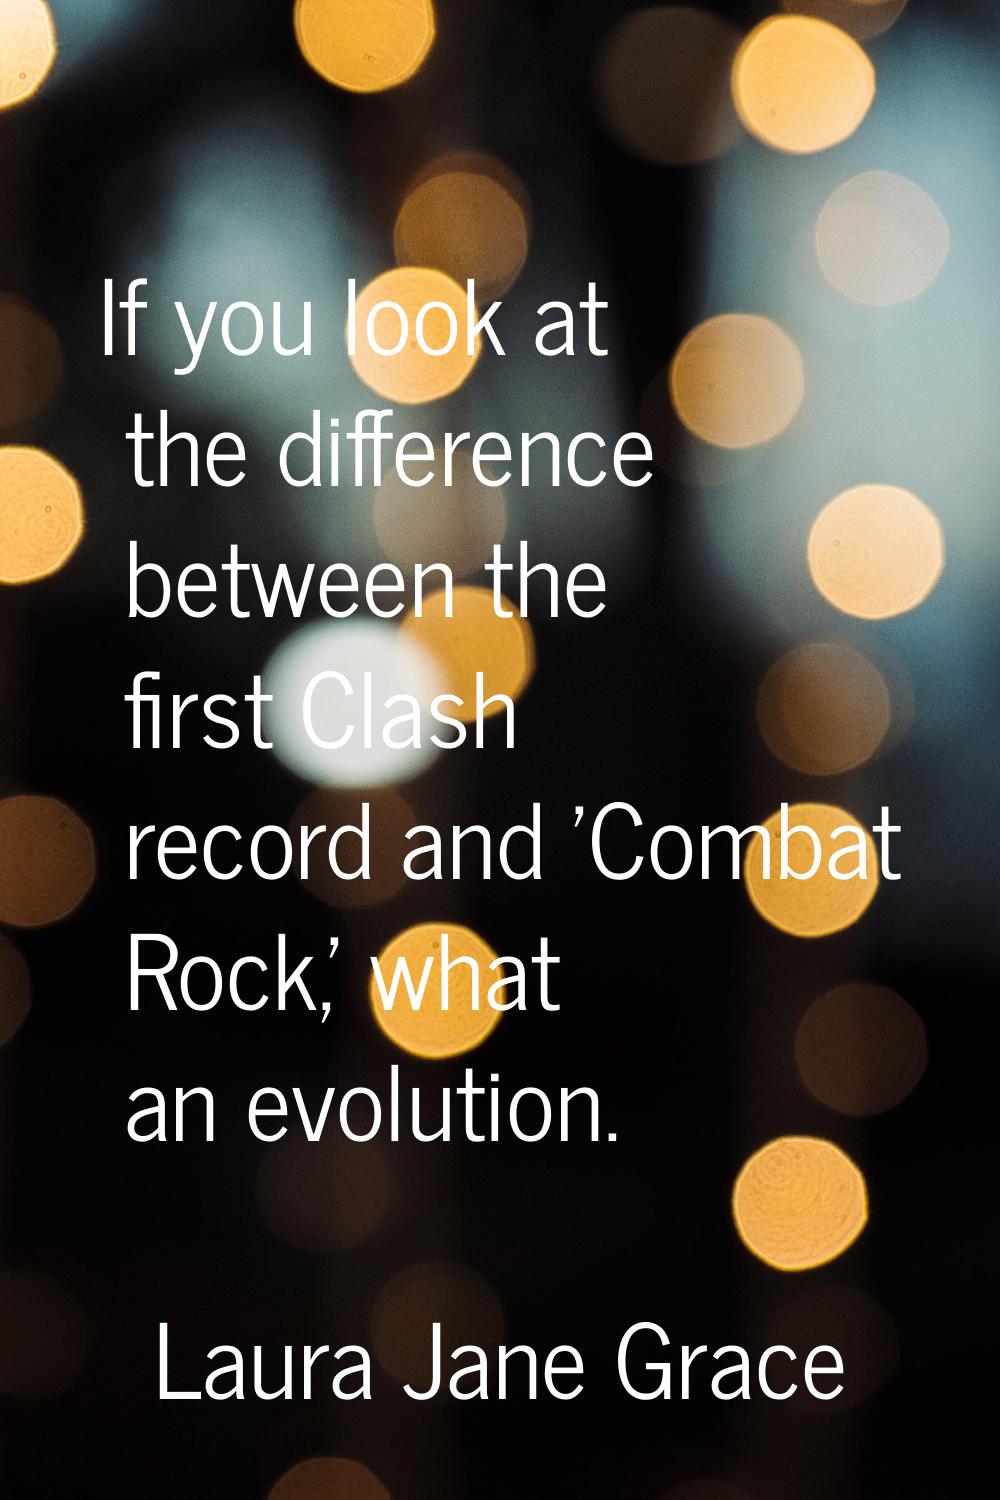 If you look at the difference between the first Clash record and 'Combat Rock,' what an evolution.